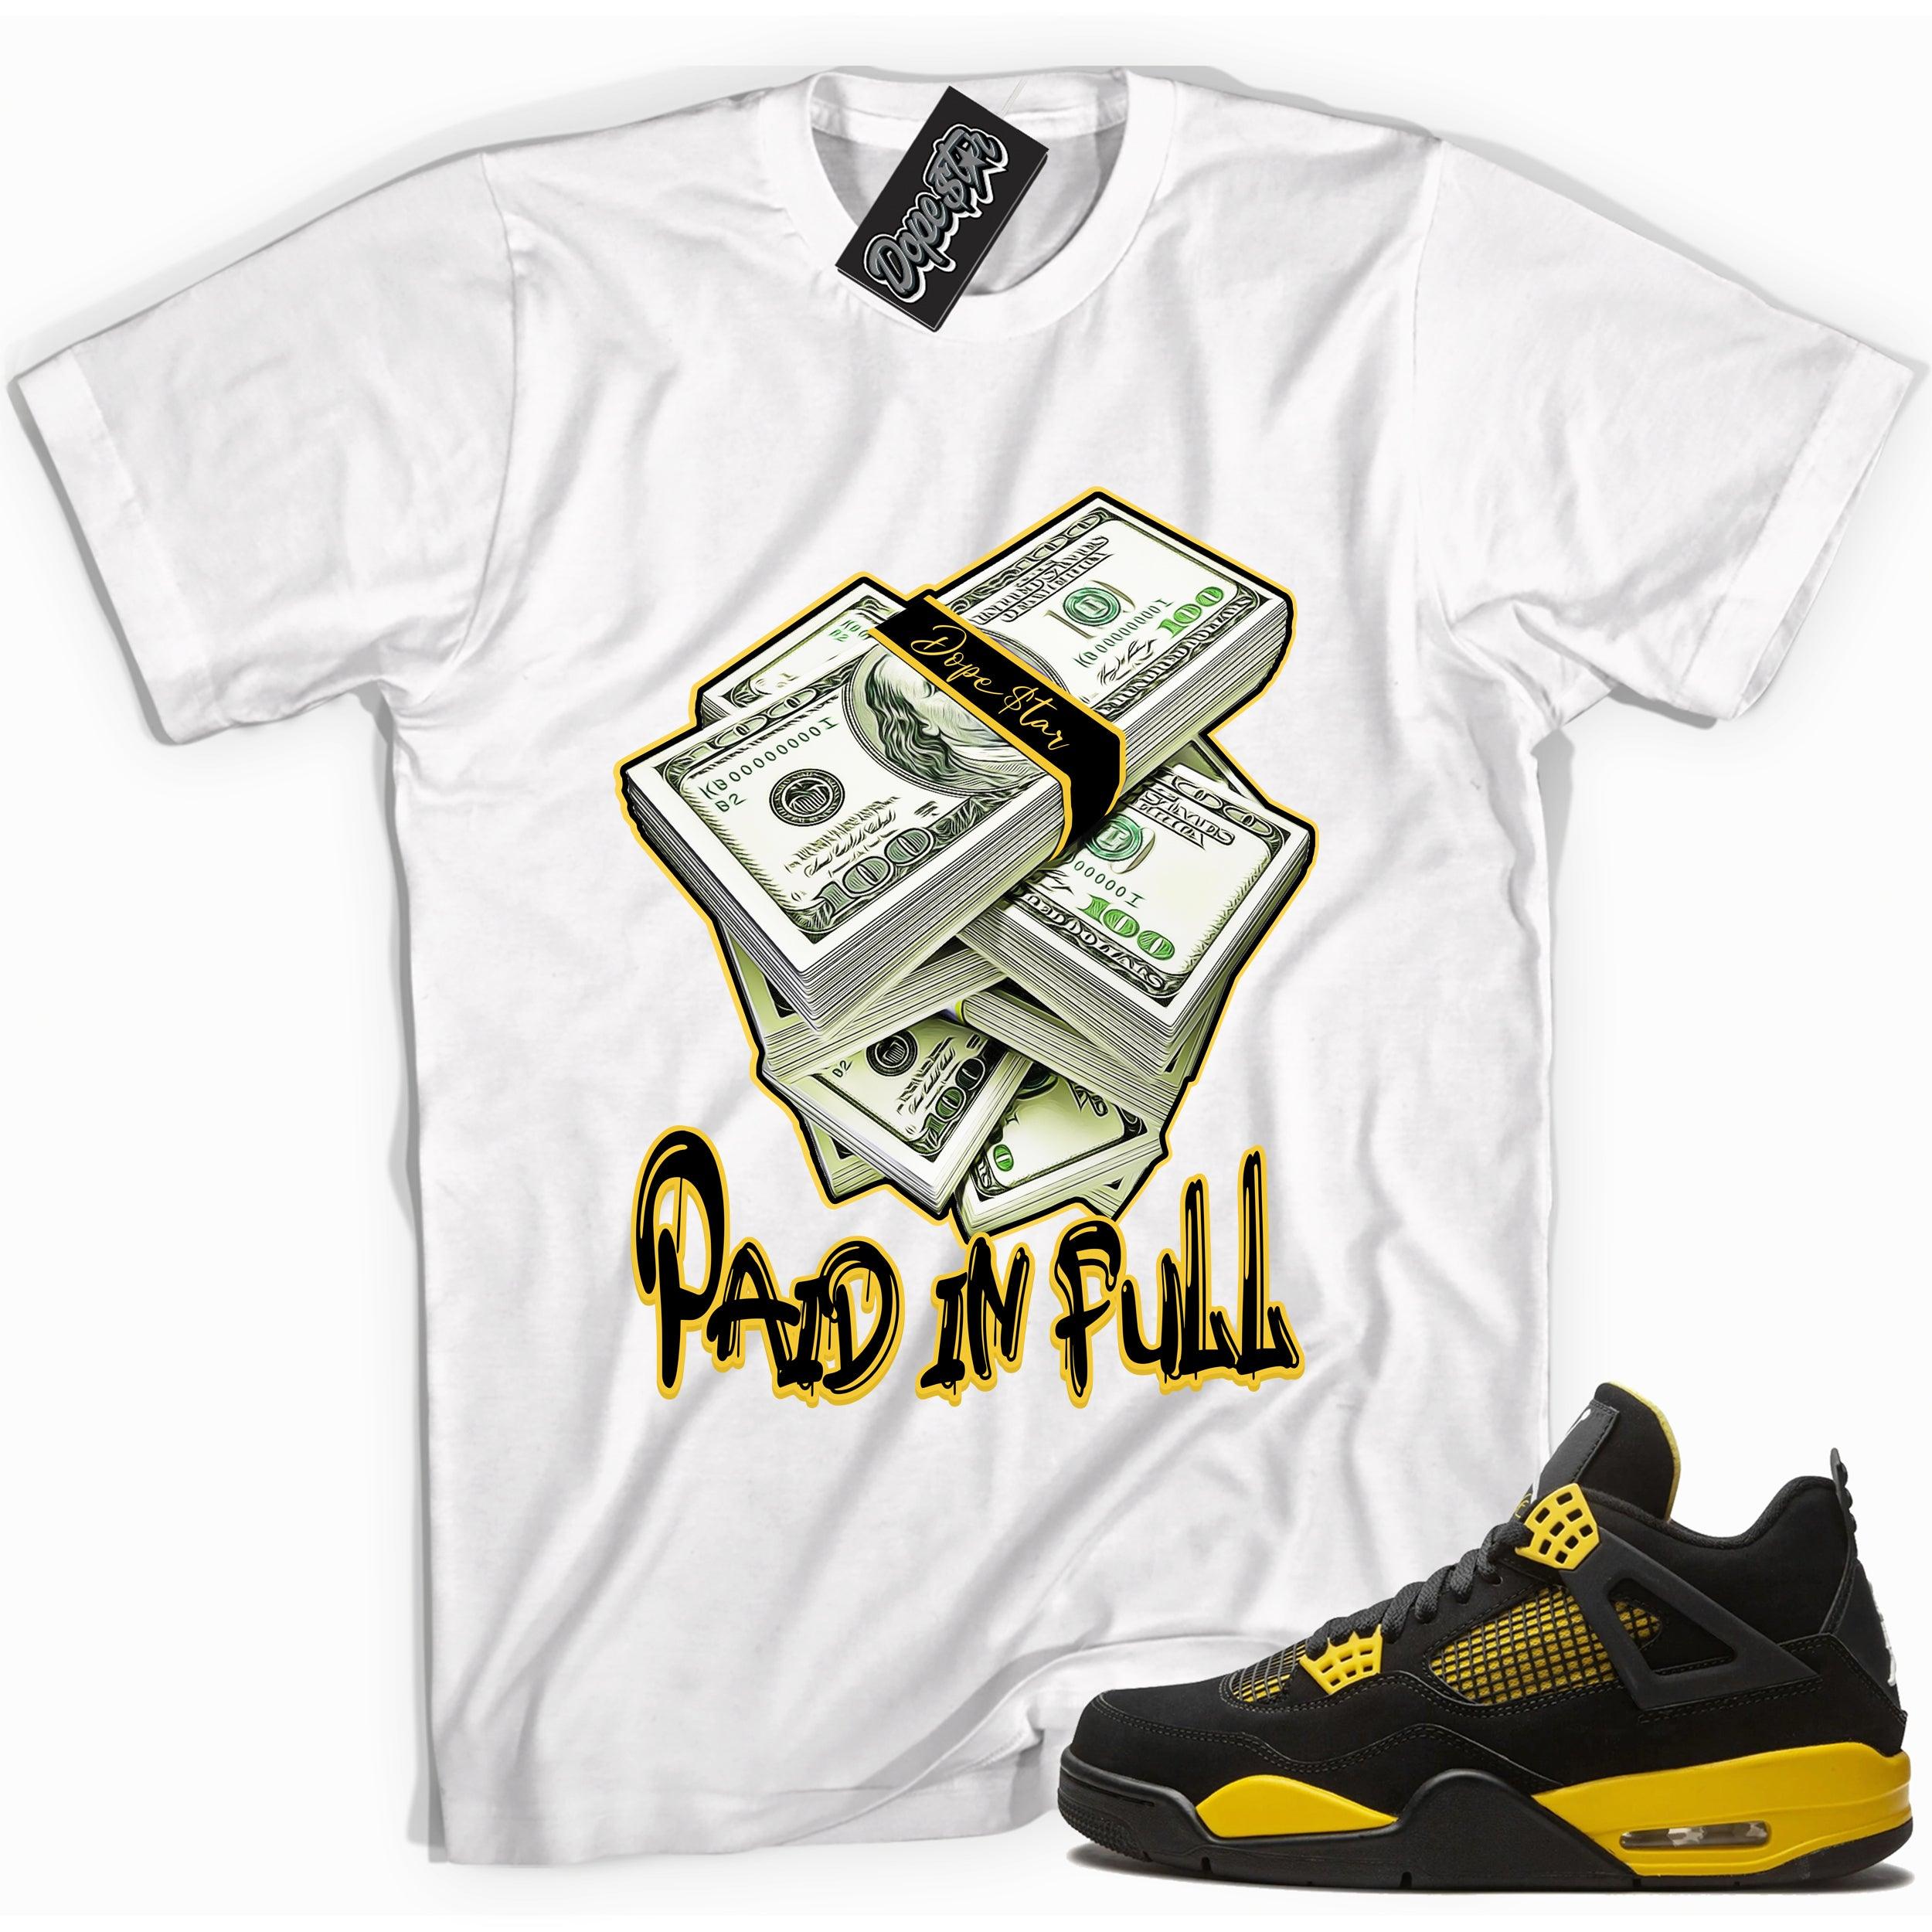 Cool white graphic tee with 'paid in full' print, that perfectly matches Air Jordan 4 Thunder sneakers